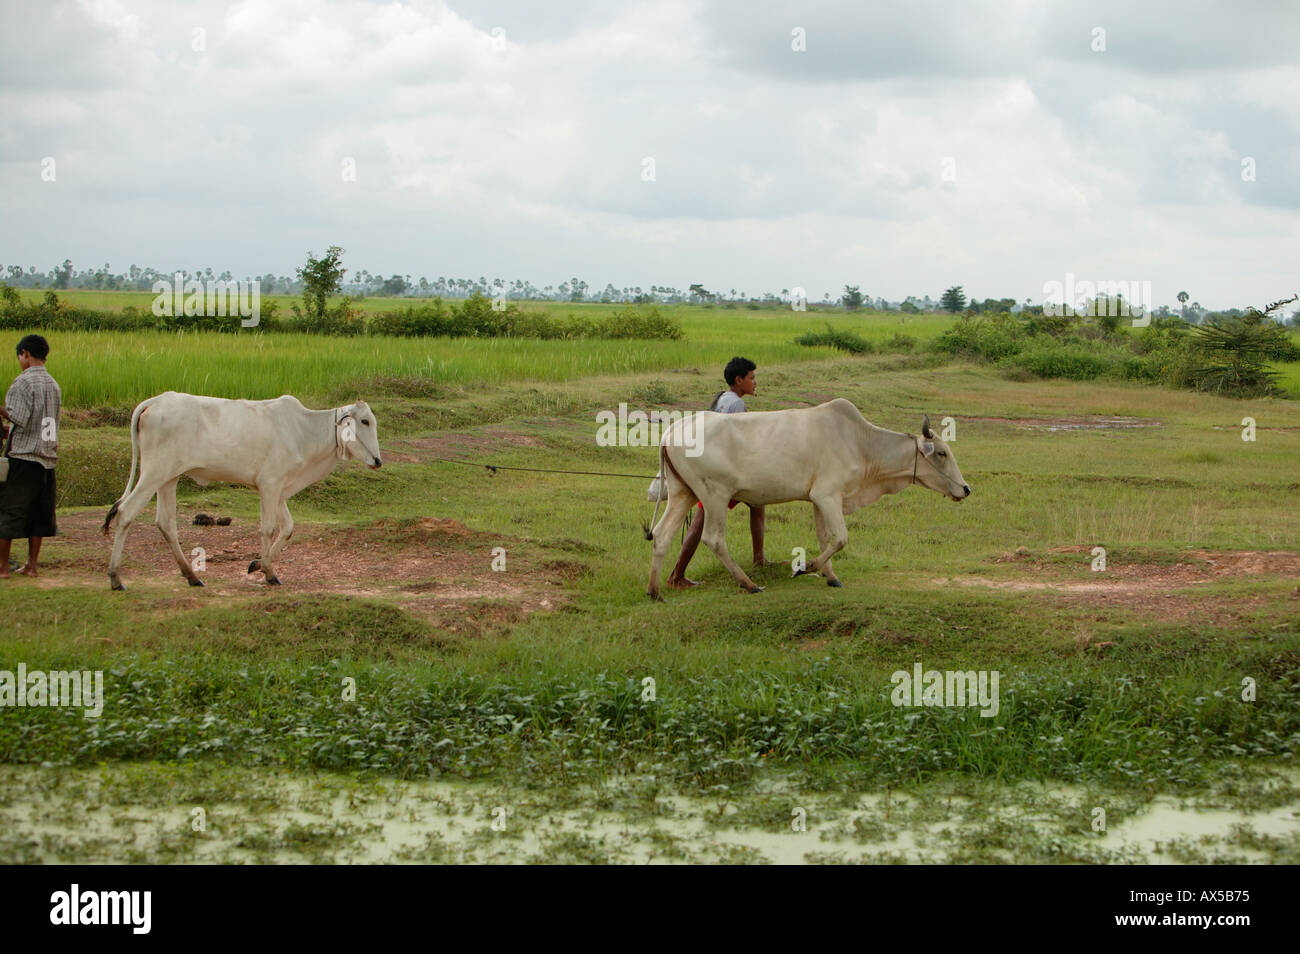 Image T0312029 Cows and their care takers Cambodia Asia Stock Photo